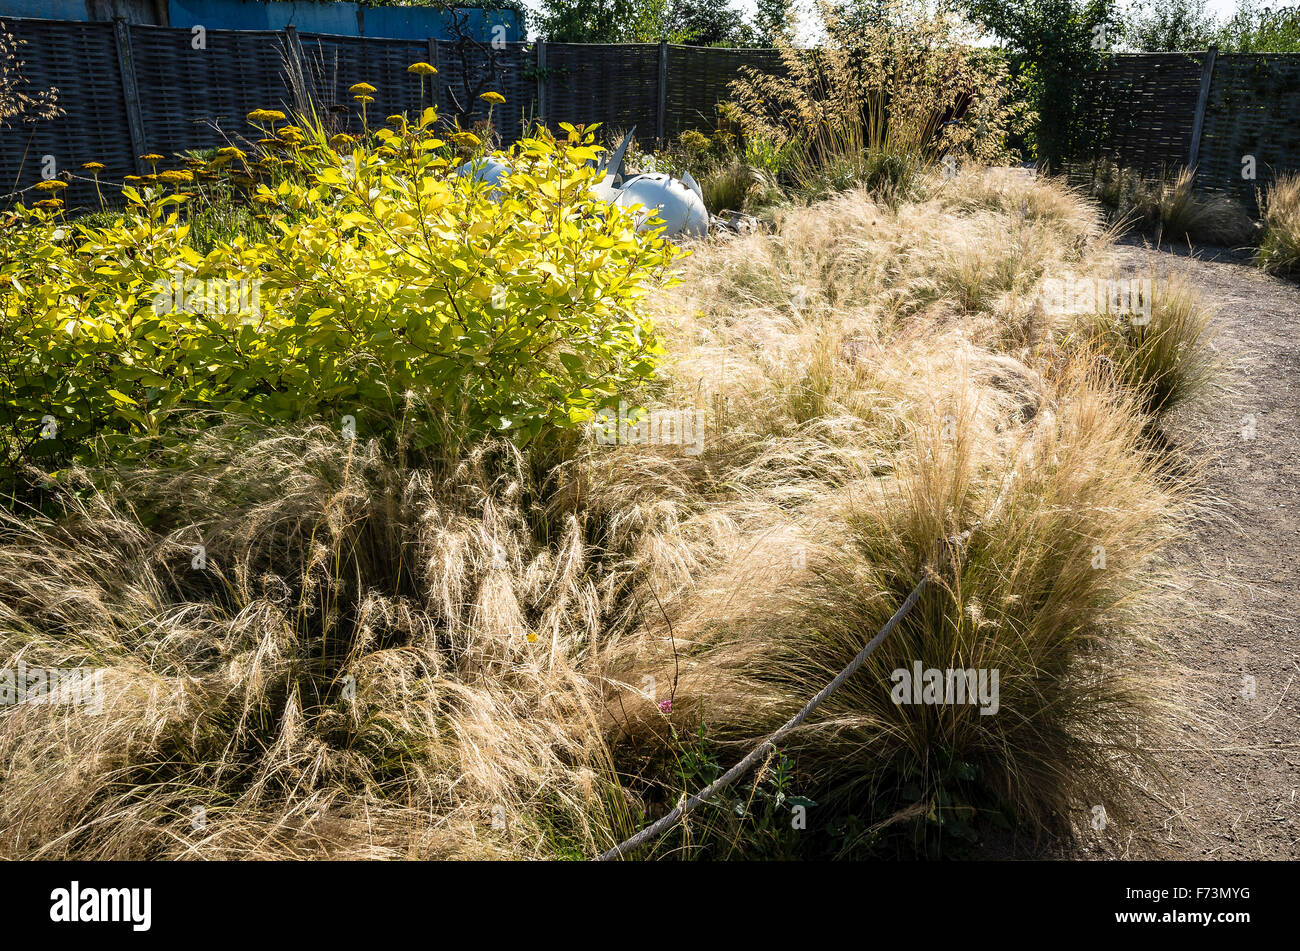 Innovative demonstration garden using characterful grasses to suggest wildness Stock Photo